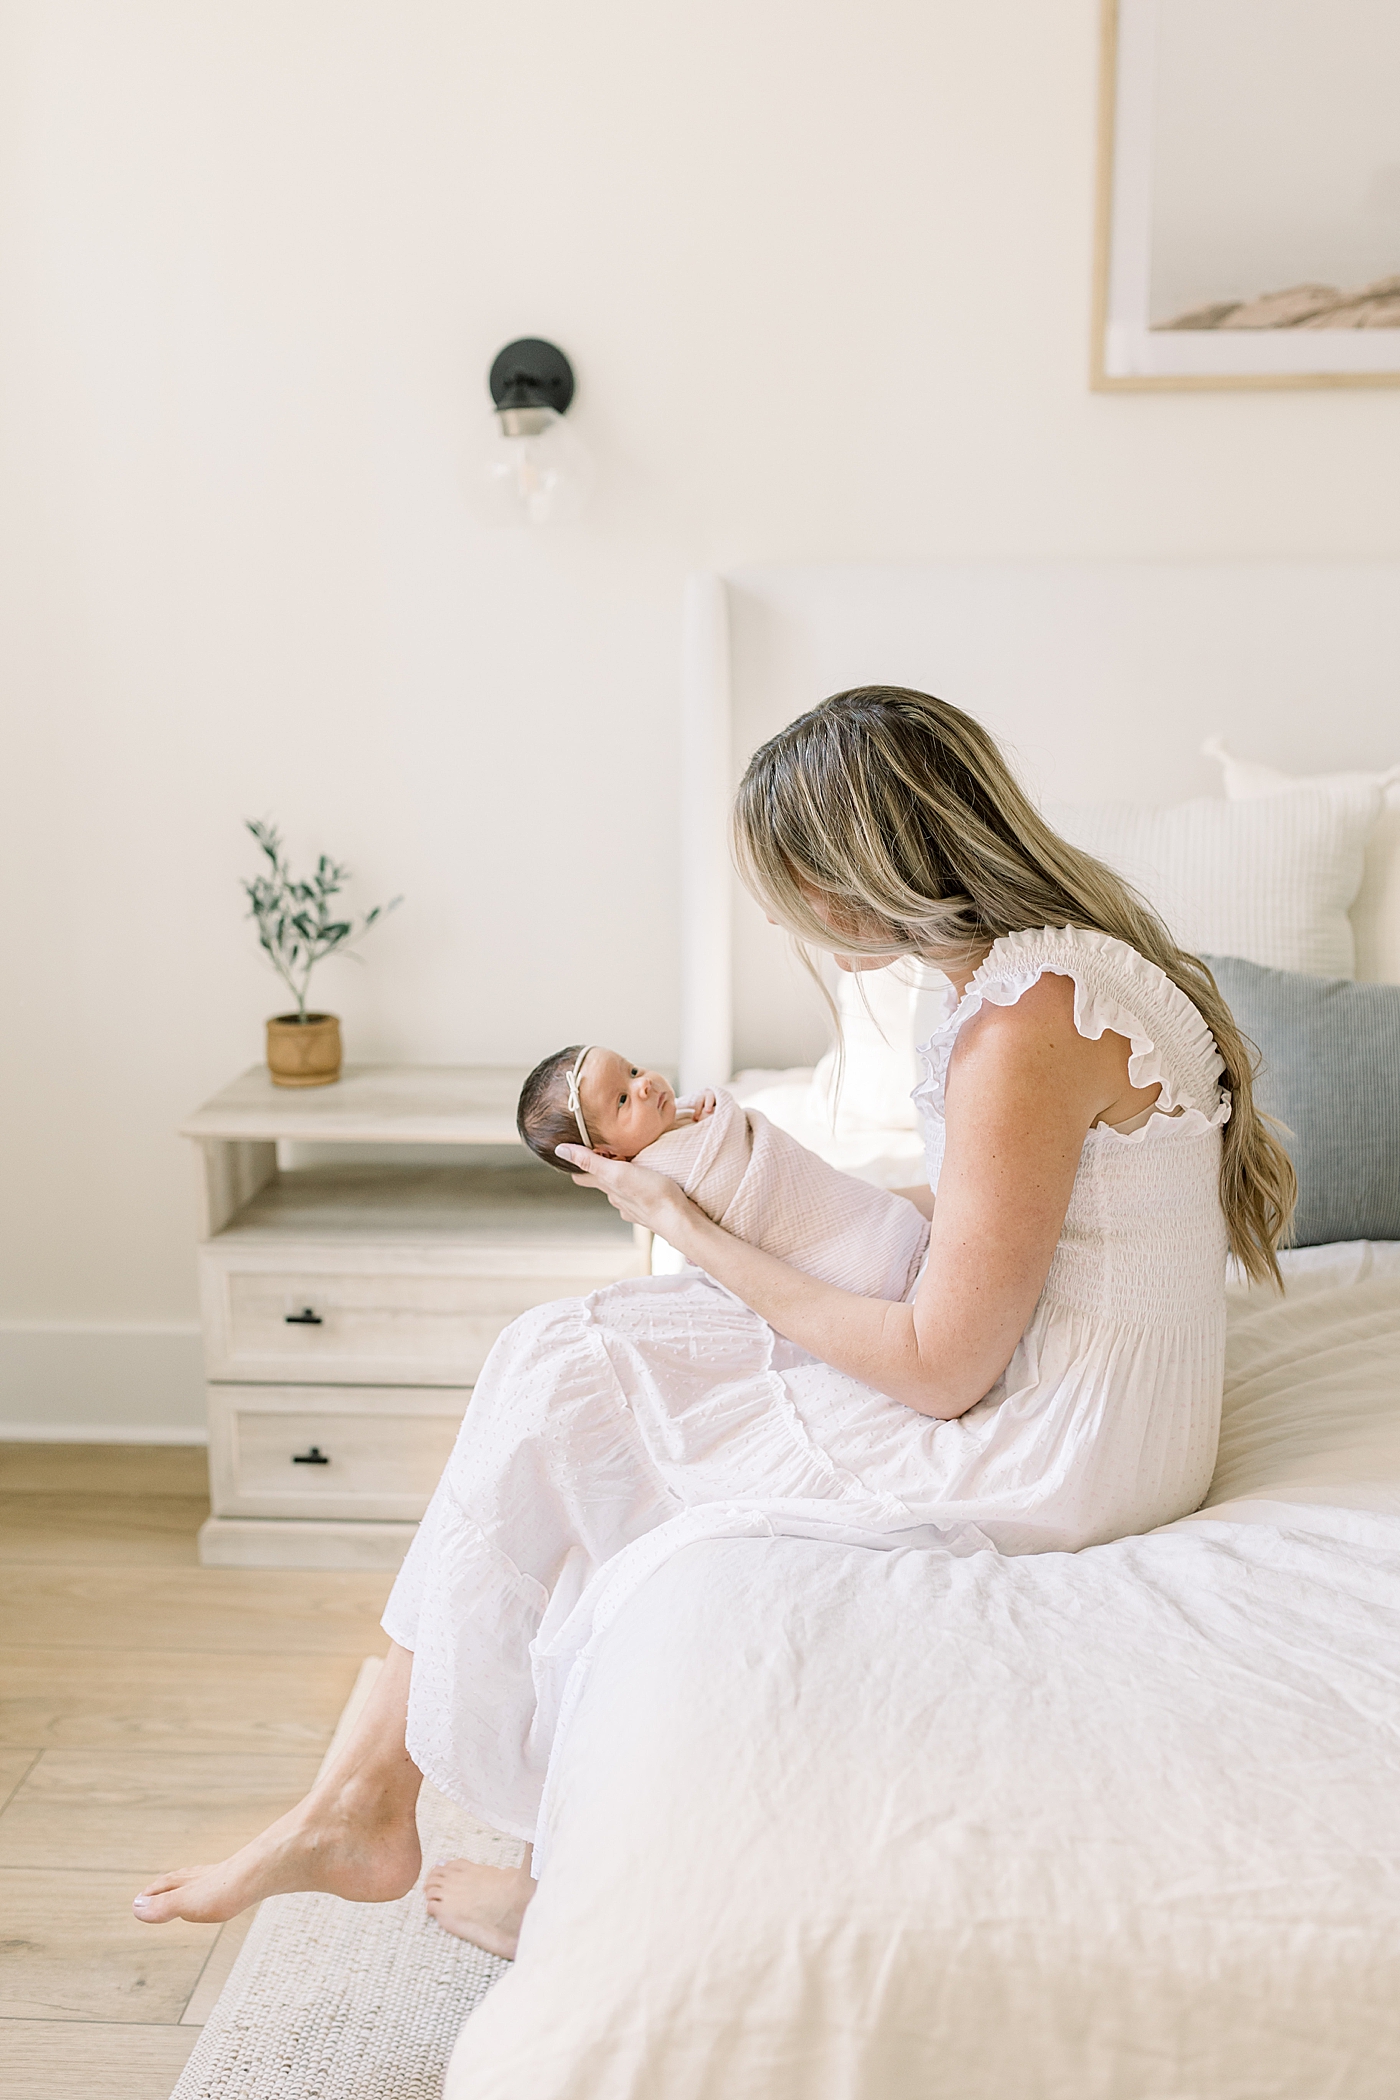 Mom in white dress sitting on the edge of her bed holding newborn baby girl | Image by Caitlyn Motycka